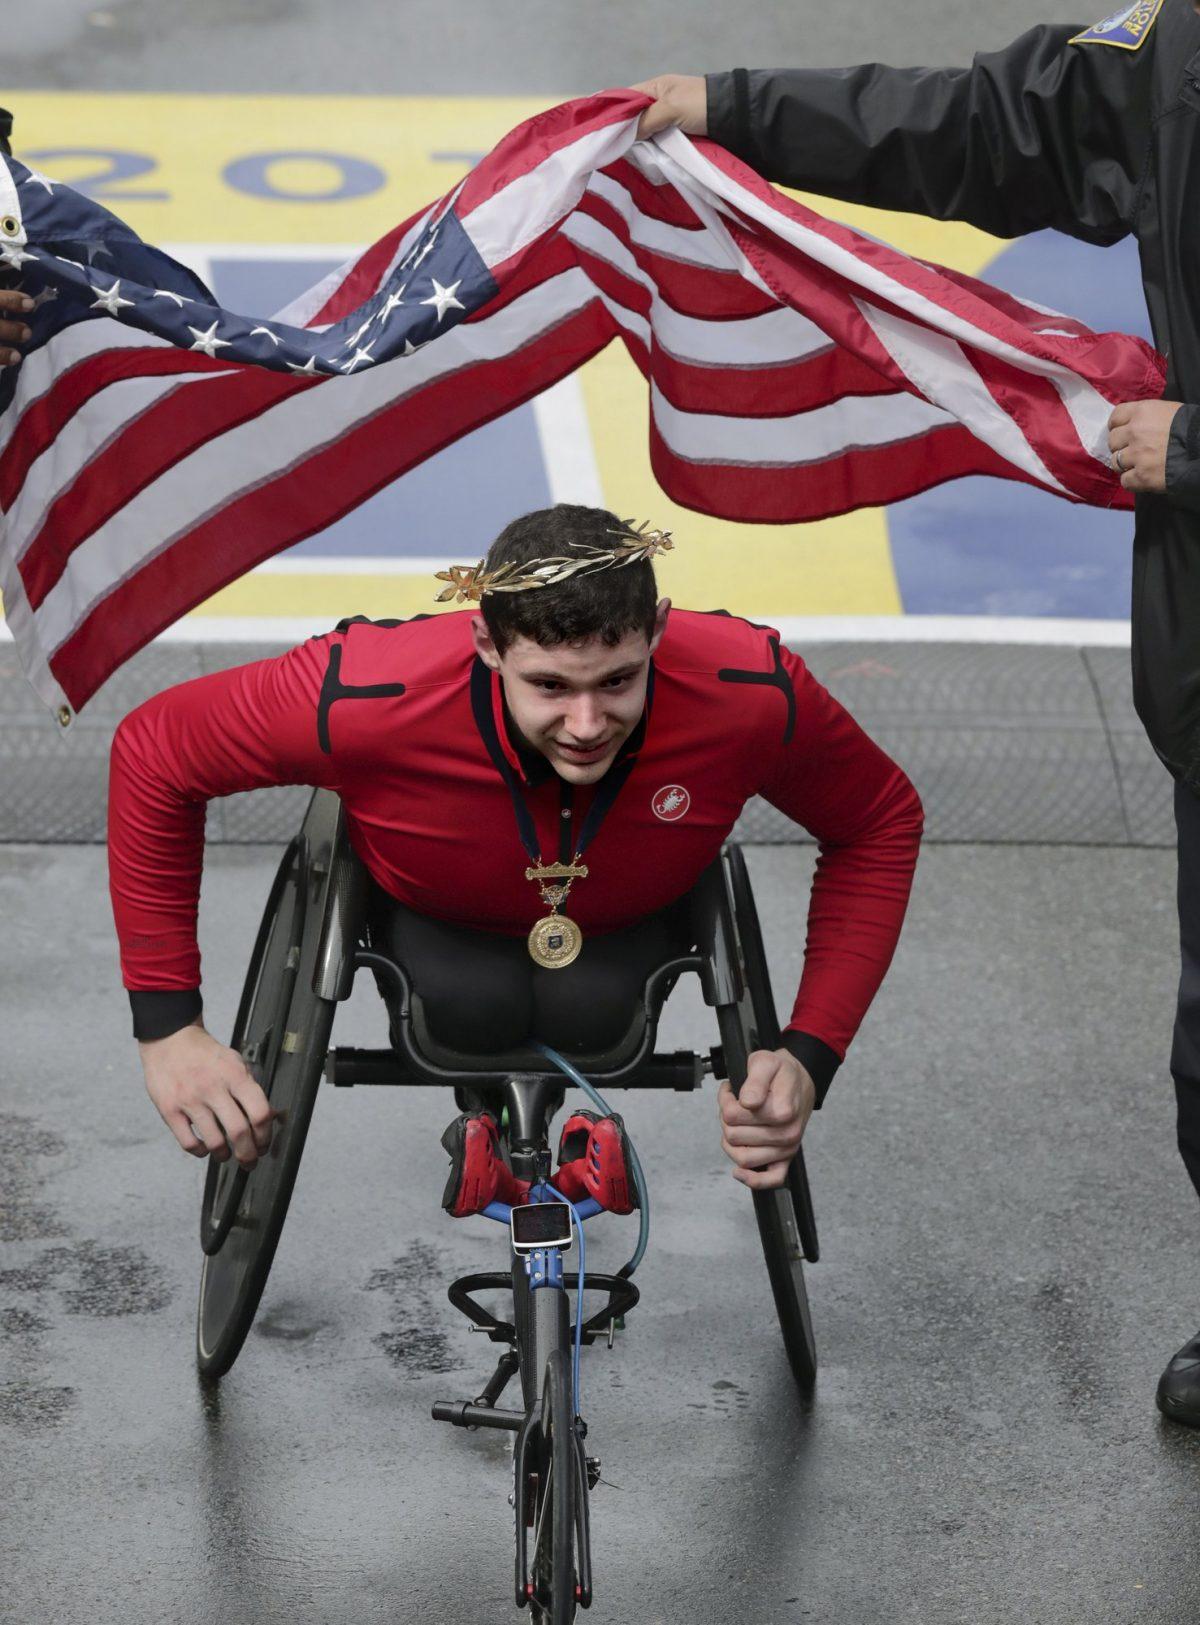 Daniel Romanchuk, of Urbana, Ill., wears the victor's wreath after winning the men's handcycle division of the 123rd Boston Marathon, in Boston on April 15, 2019. (Charles Krupa/AP Photo)